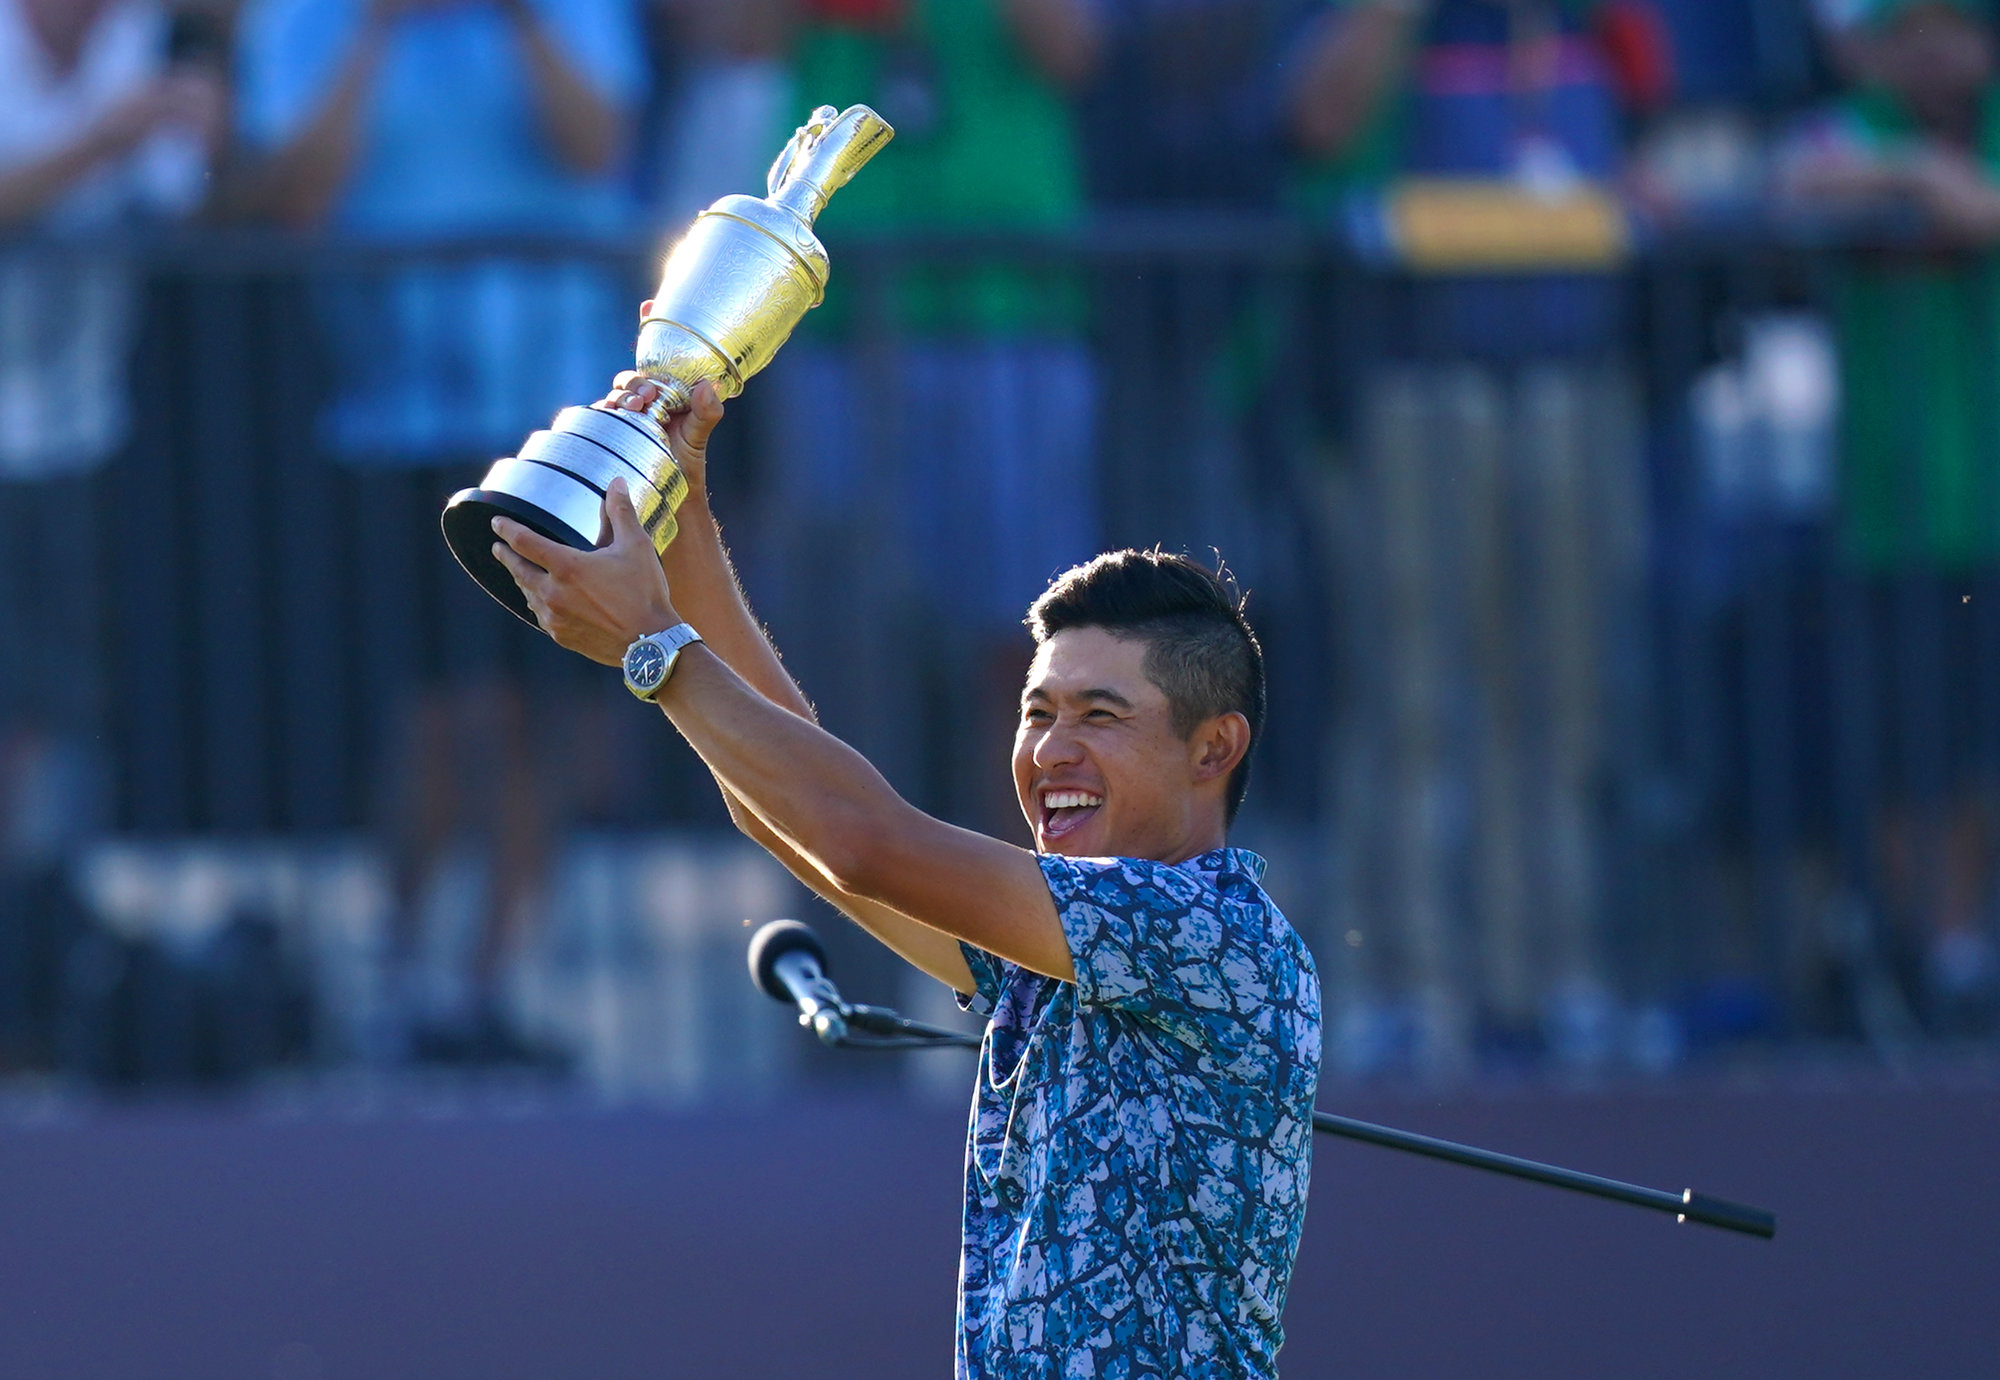 Collin Morikawa Wins The Open Championship After Flawless Final Day